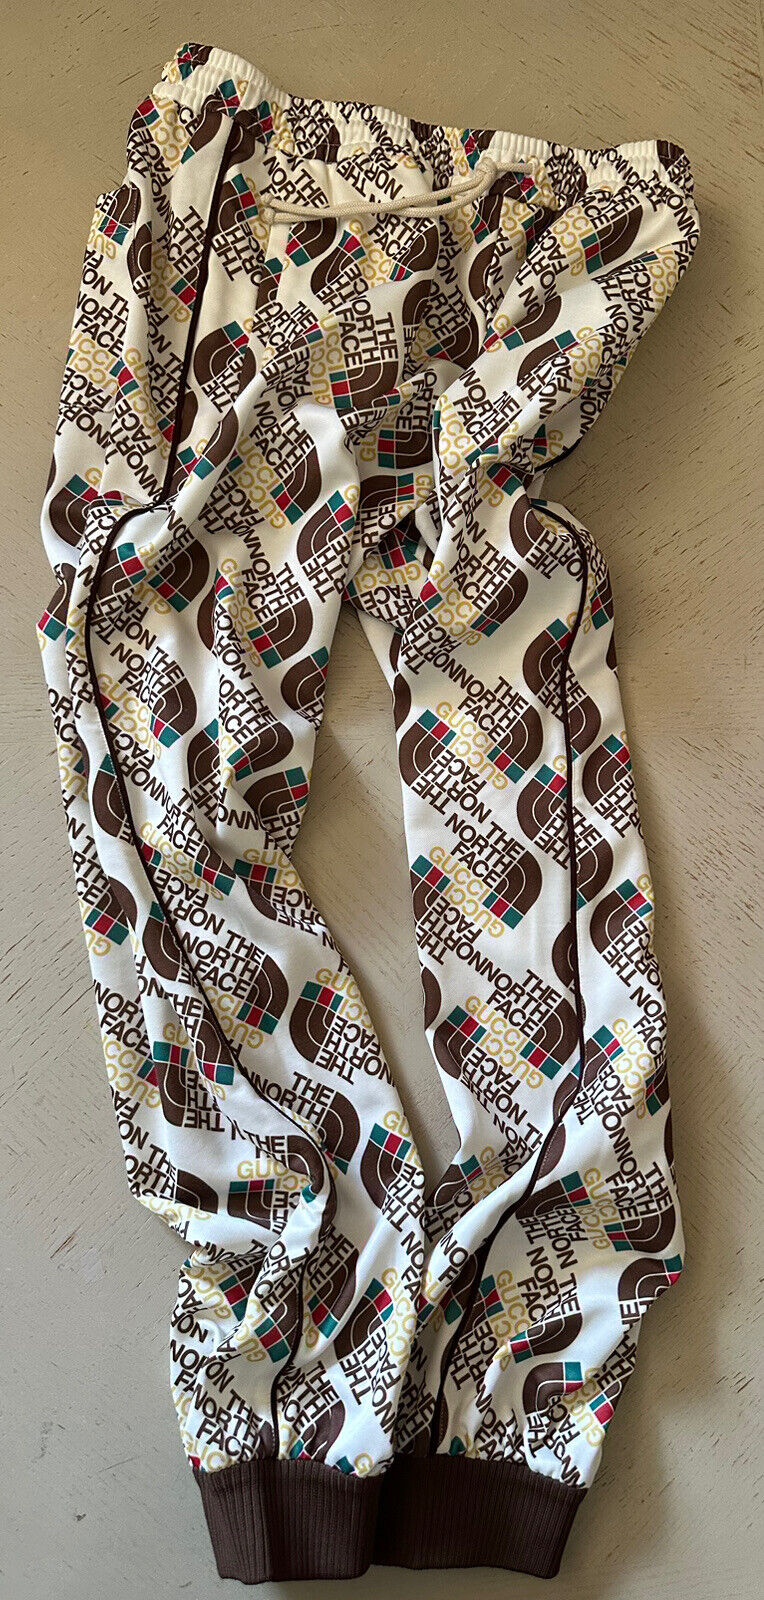 New $1530 Gucci Men’s Track Pants Brown/Multicolor Size L Made in Italy